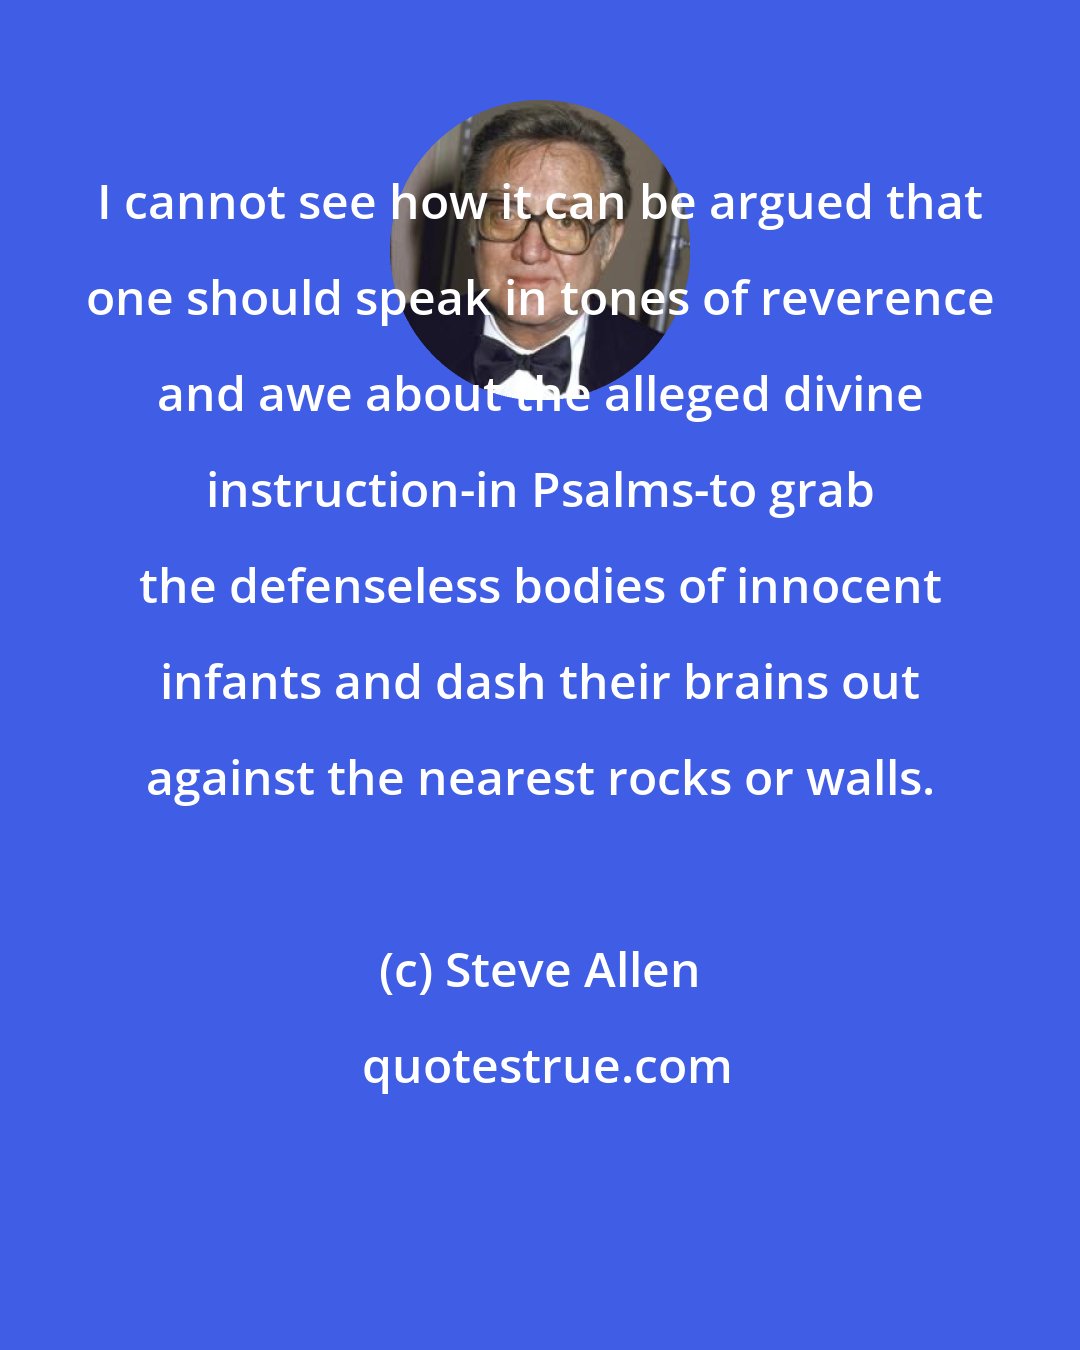 Steve Allen: I cannot see how it can be argued that one should speak in tones of reverence and awe about the alleged divine instruction-in Psalms-to grab the defenseless bodies of innocent infants and dash their brains out against the nearest rocks or walls.